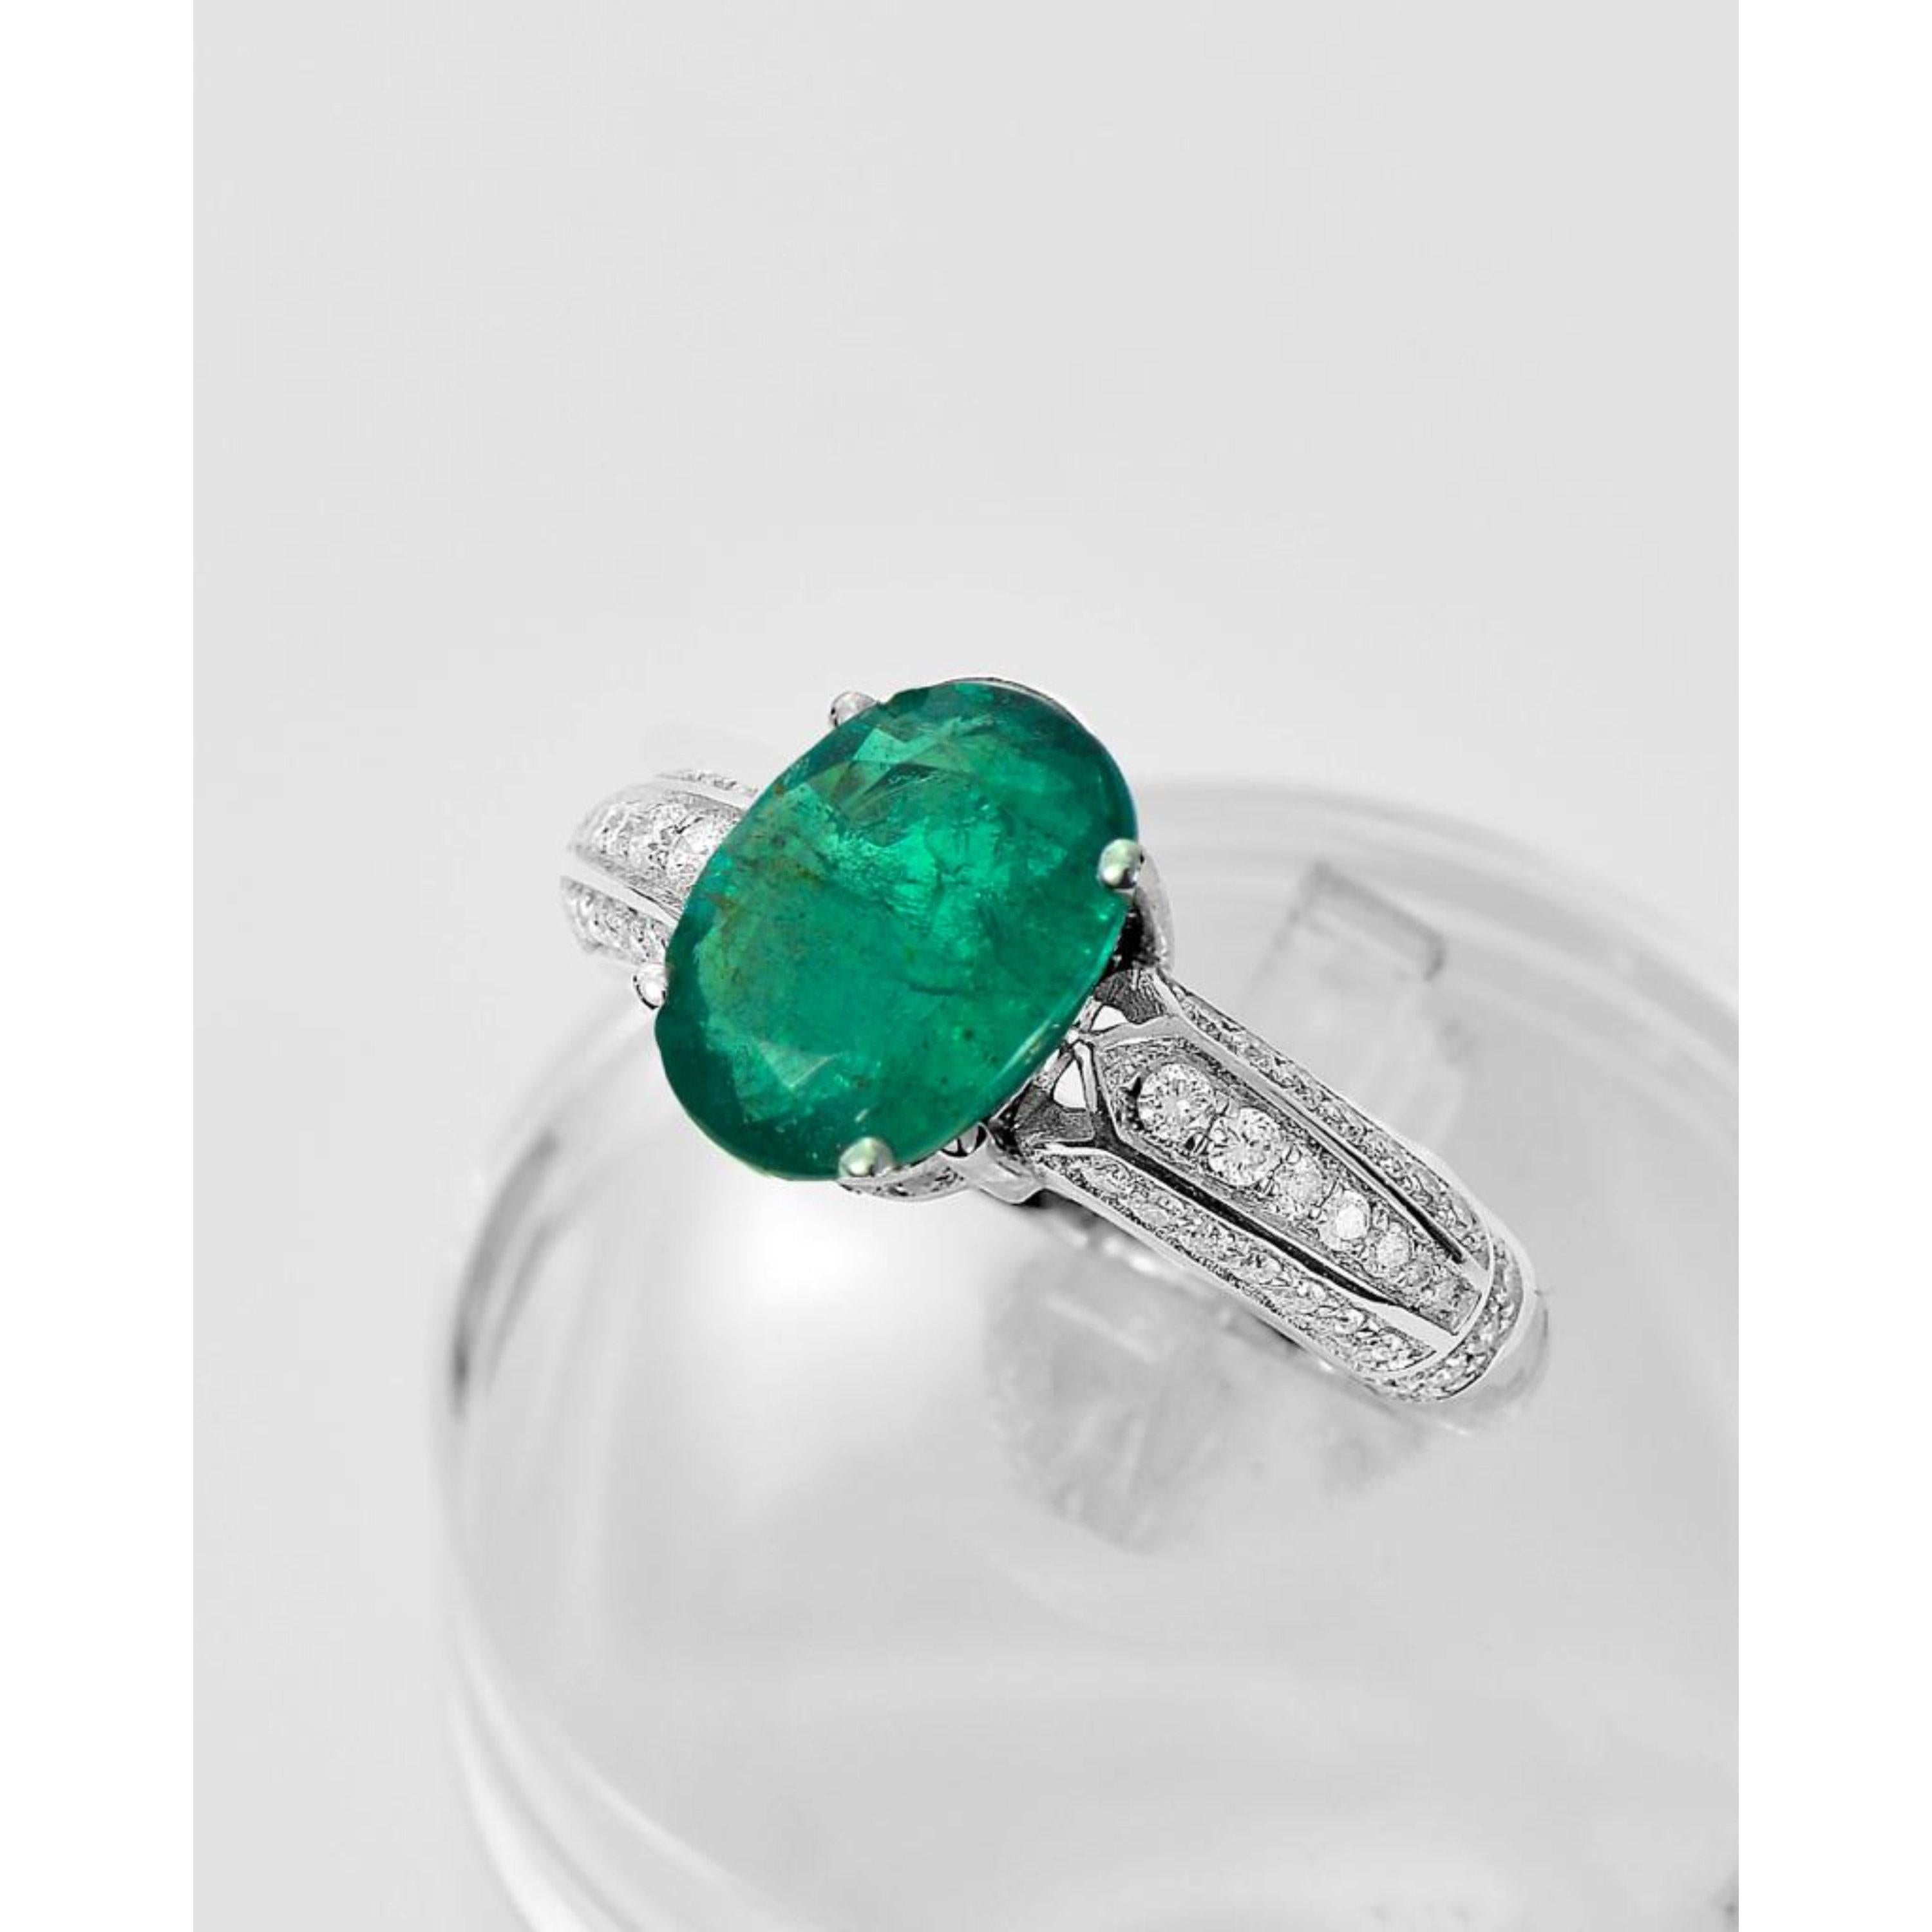 For Sale:  Unique 2 Carat Oval Cut Emerald Diamond Engagement Ring, Vintage White Gold Ring 3